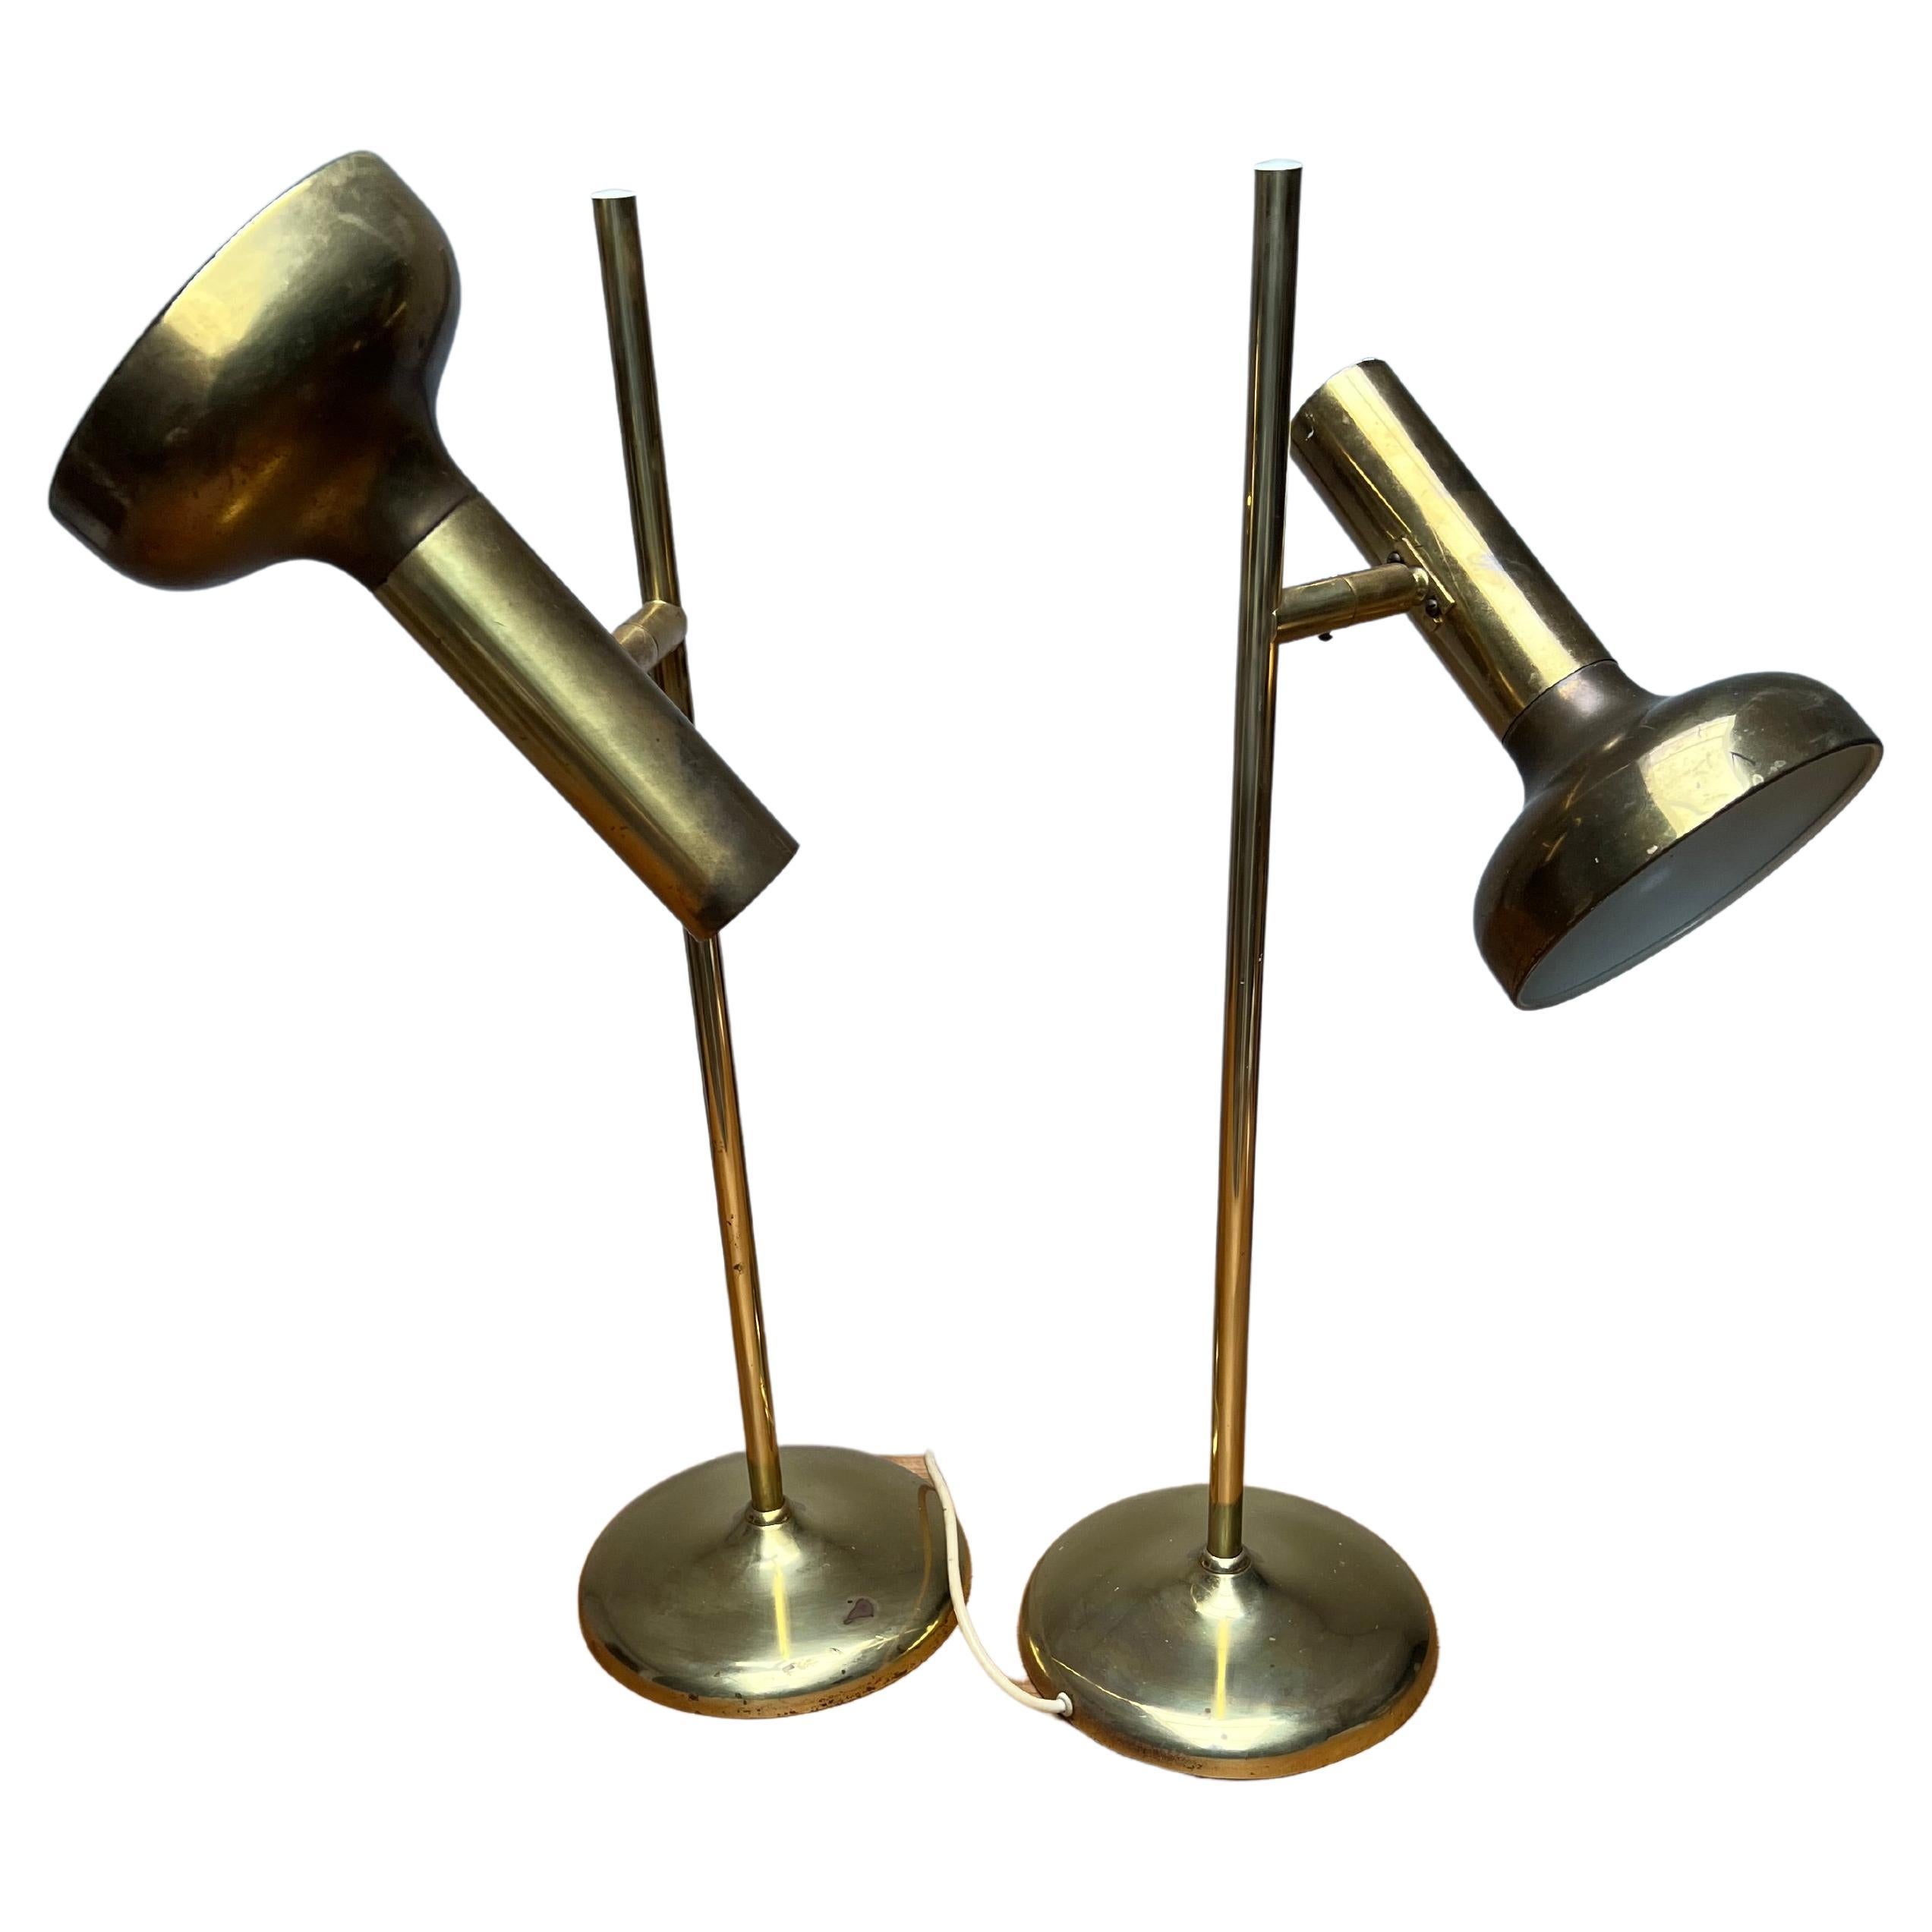 Rare Pair of Midcentury Modern Koch and Lowy for OMI Rotatable Brass Table Lamps